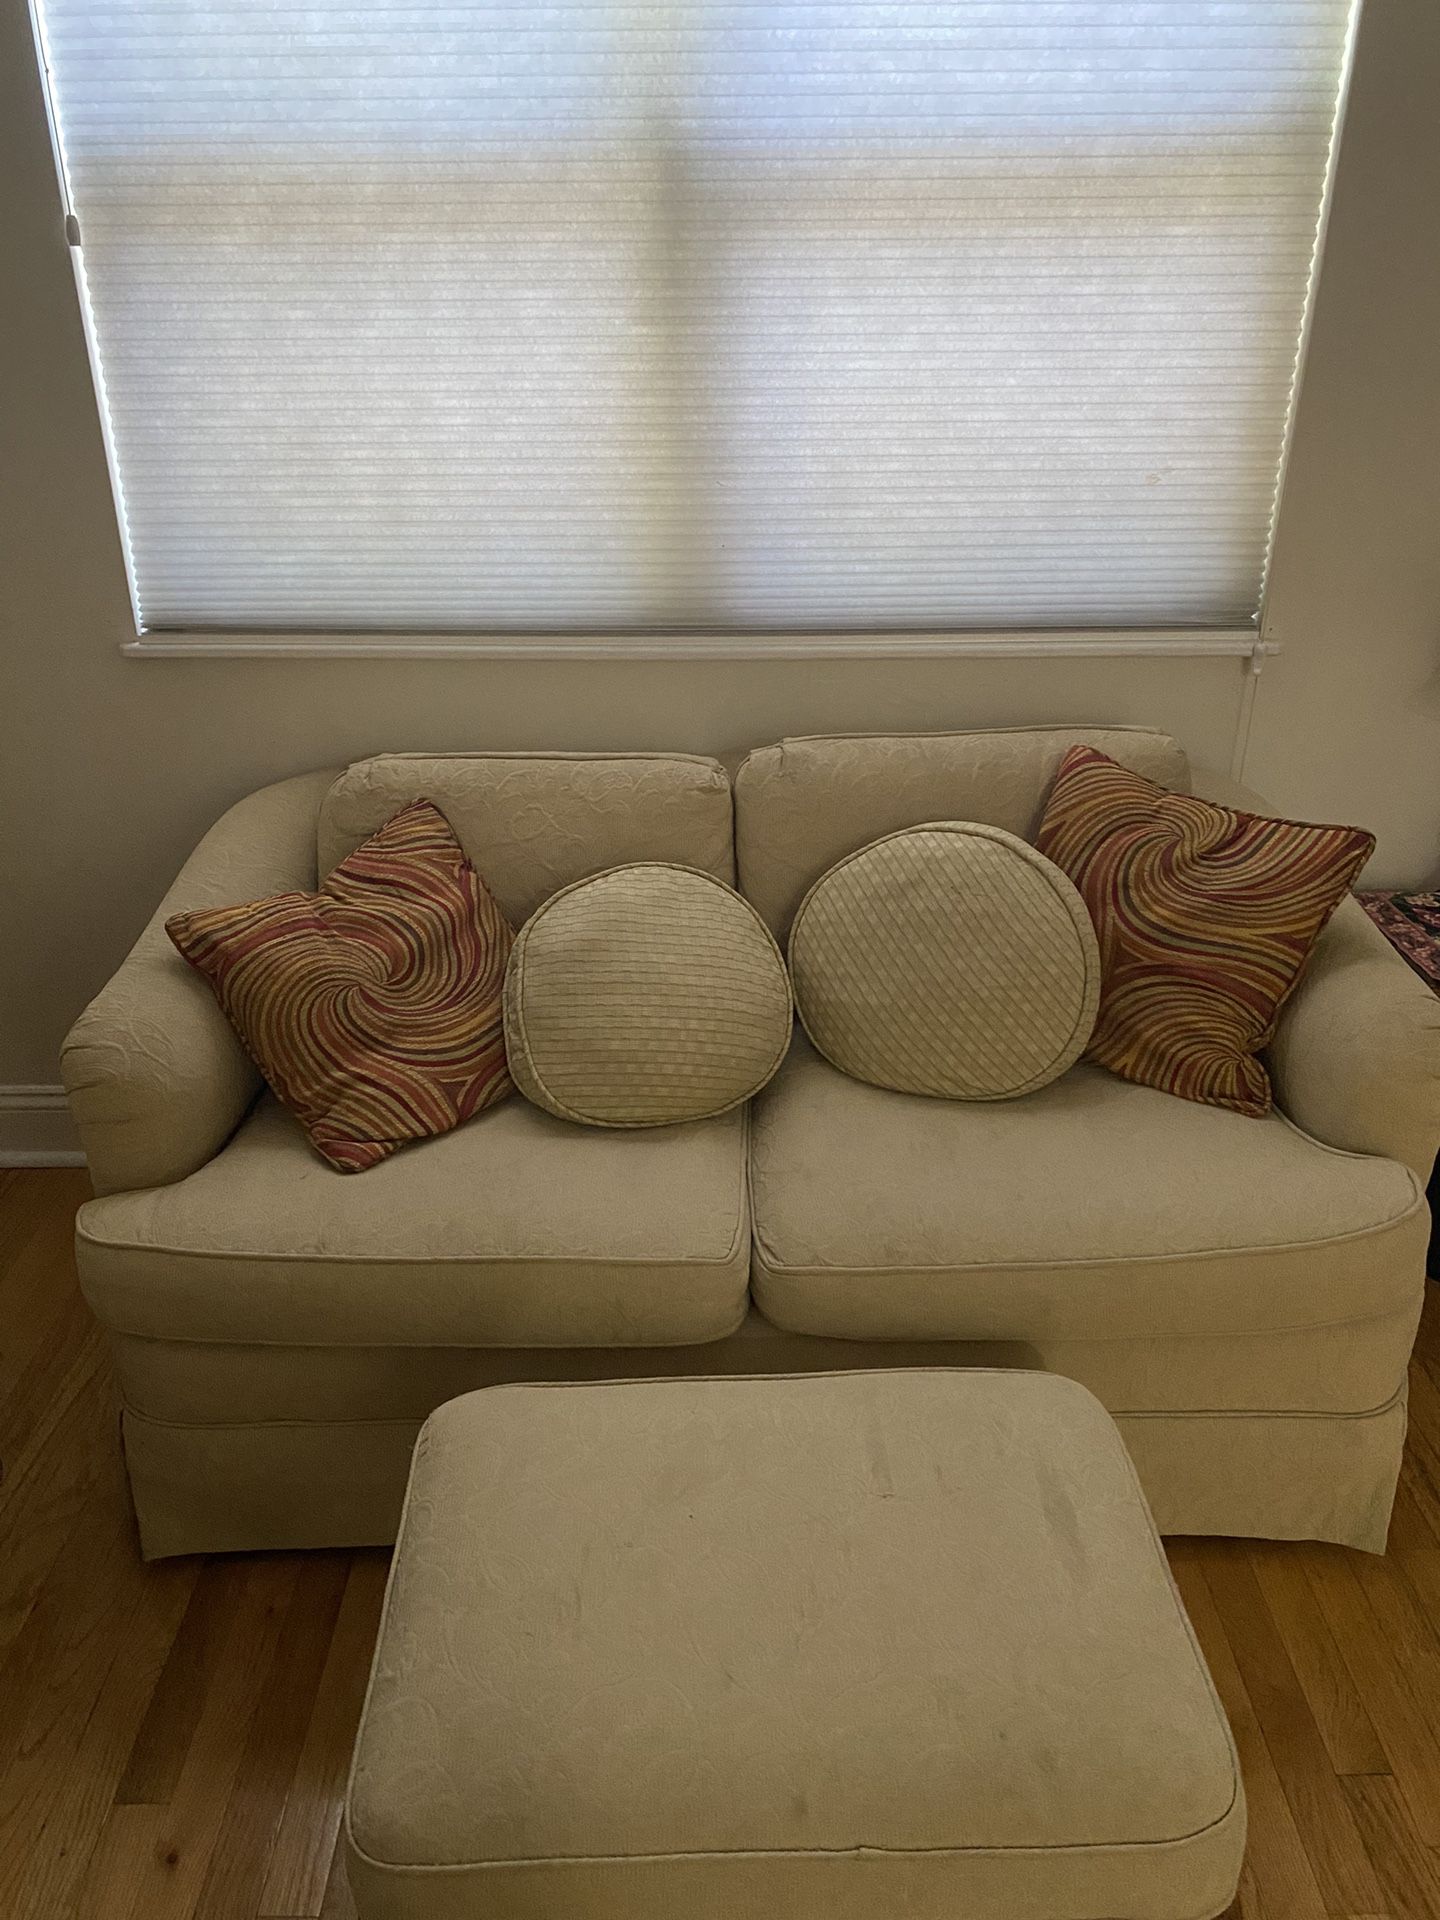 MUST GO - Best Offer - Loveseat and Ottoman GOES -Sunday - Pick Up 5/5 at 9:30a